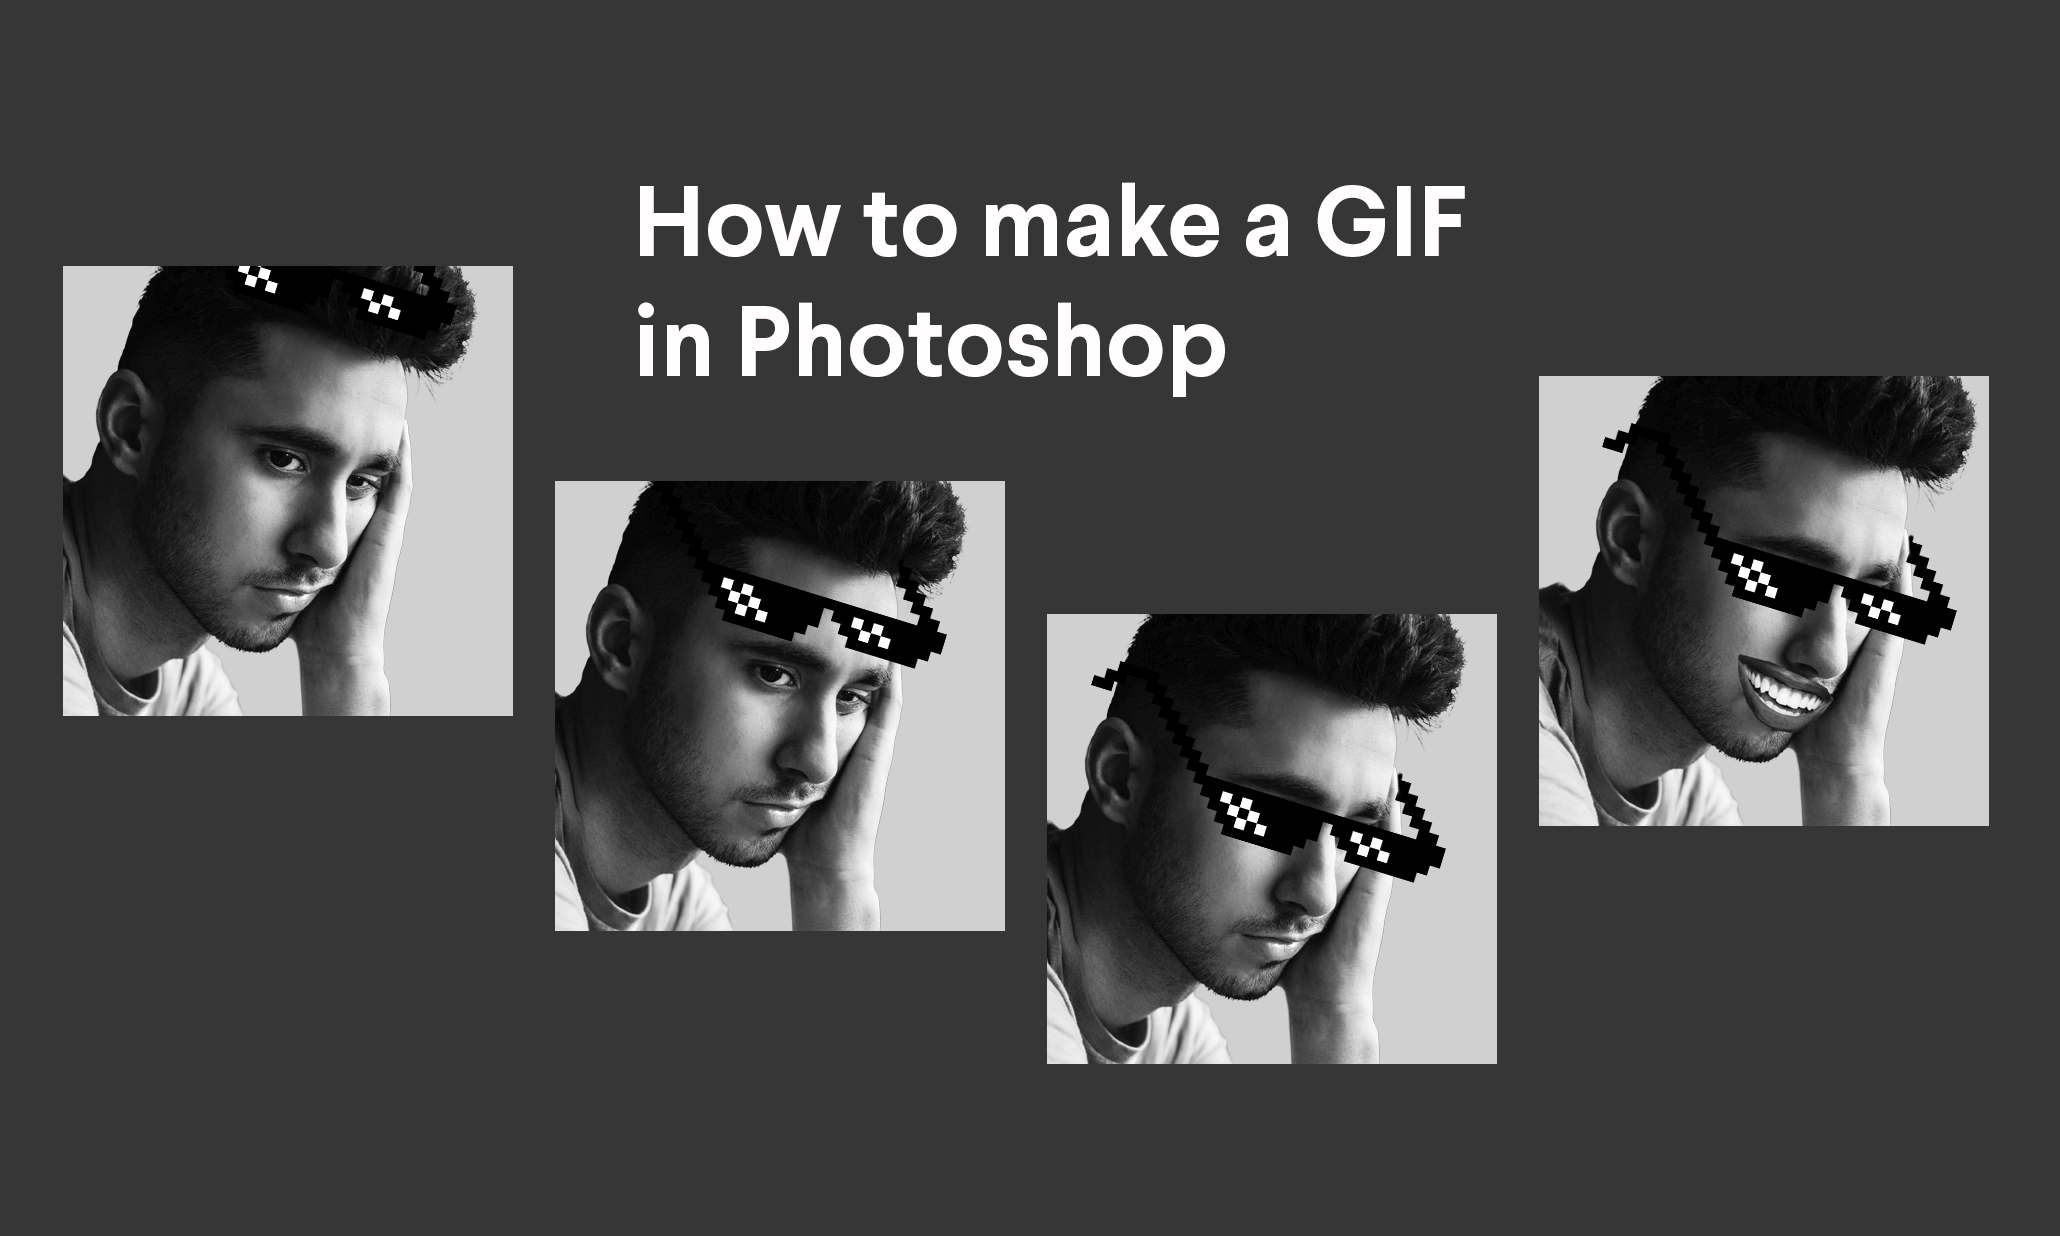 How to Make a GIF in Photoshop - Create/Export GIF in Photoshop